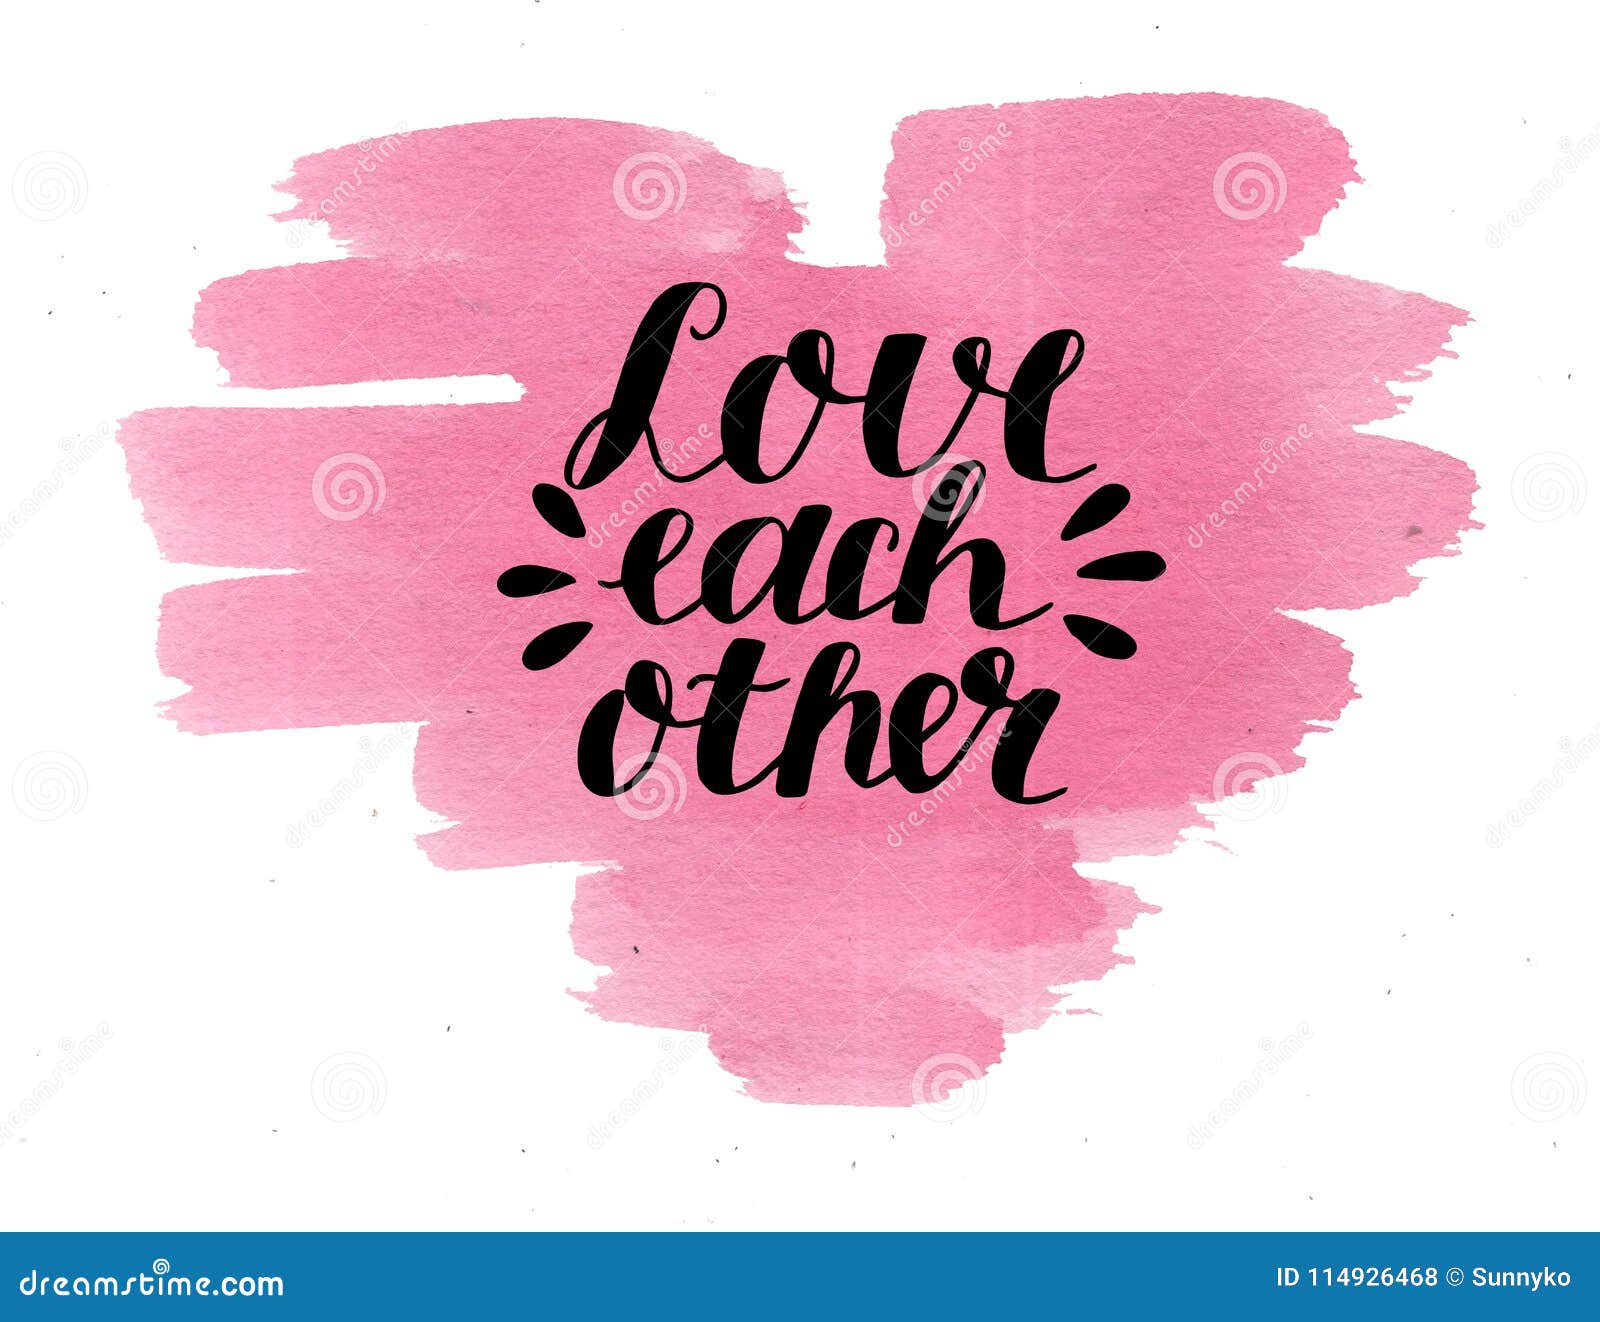 Hand Lettering Love Each Other on Watercolor Heart. Stock Illustration ...